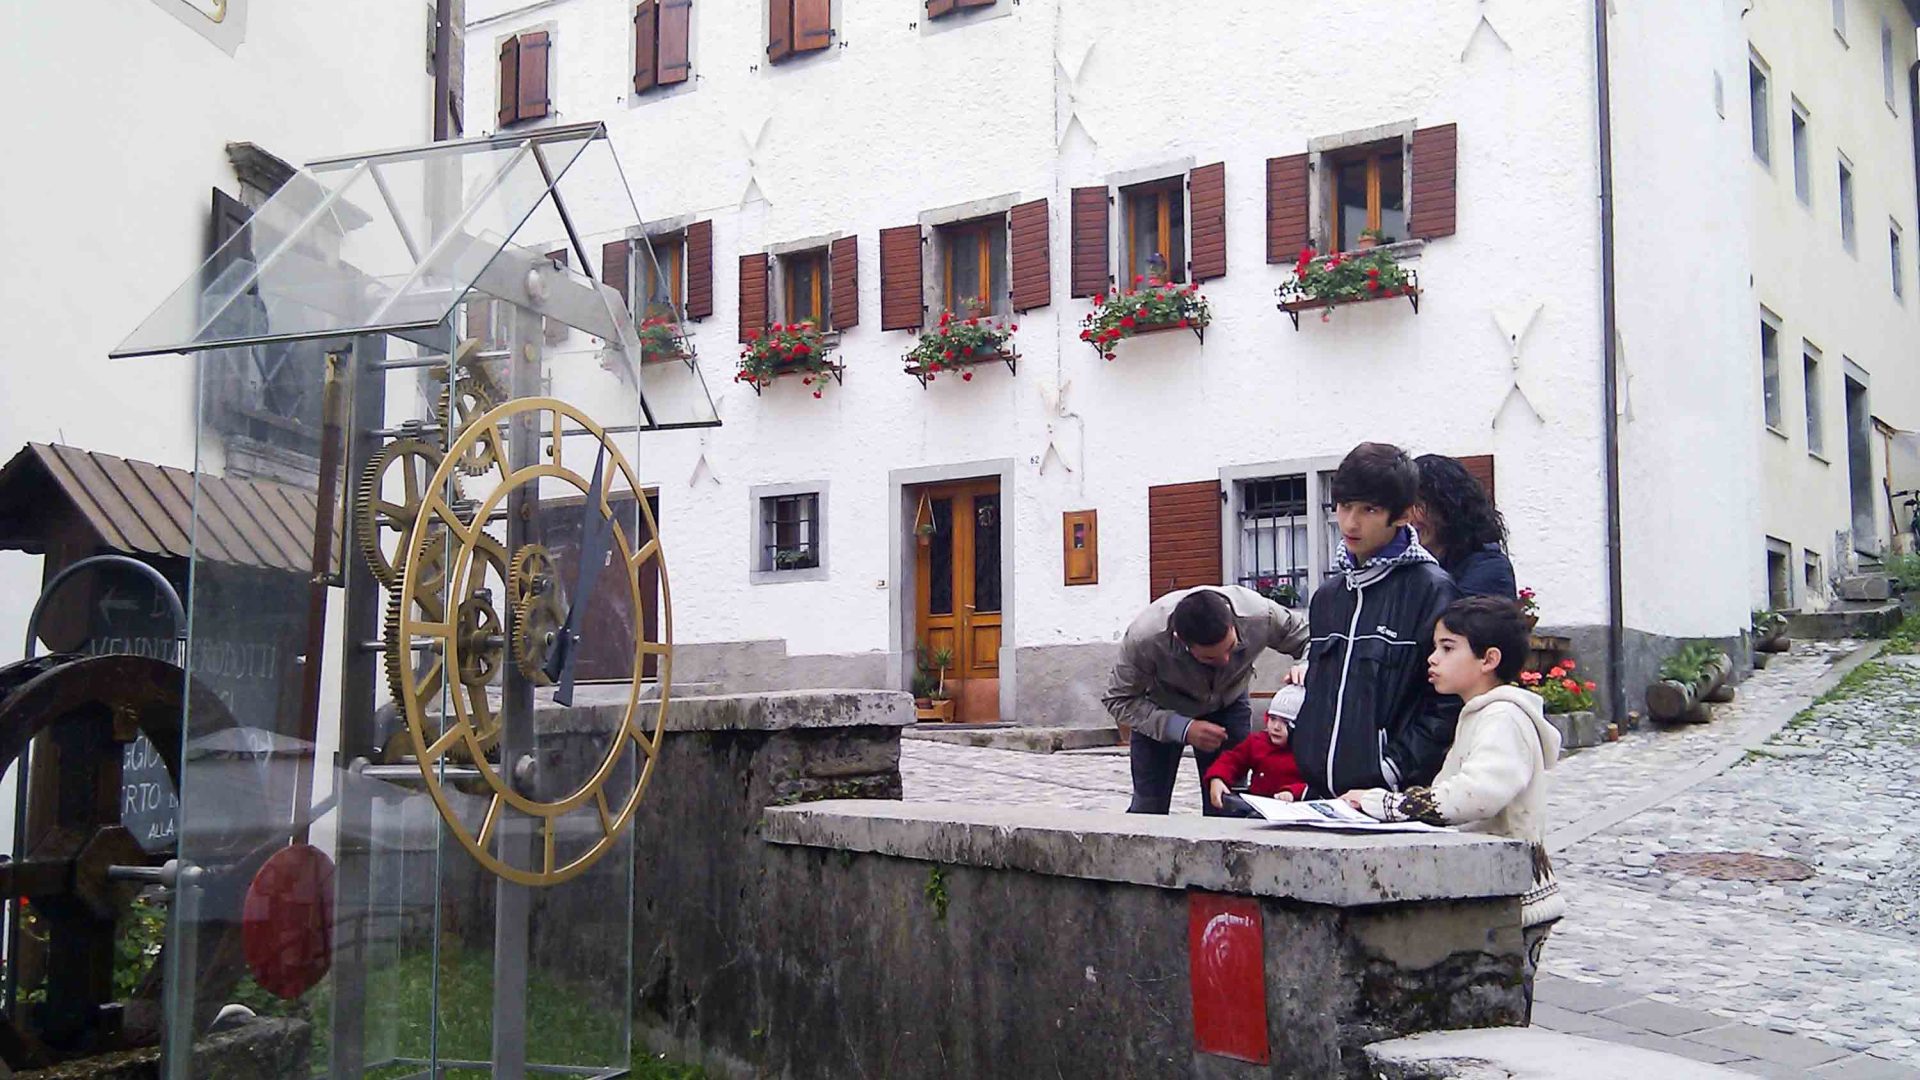 A family stops to look at a clock in Pesariis. There is a white building behind them.